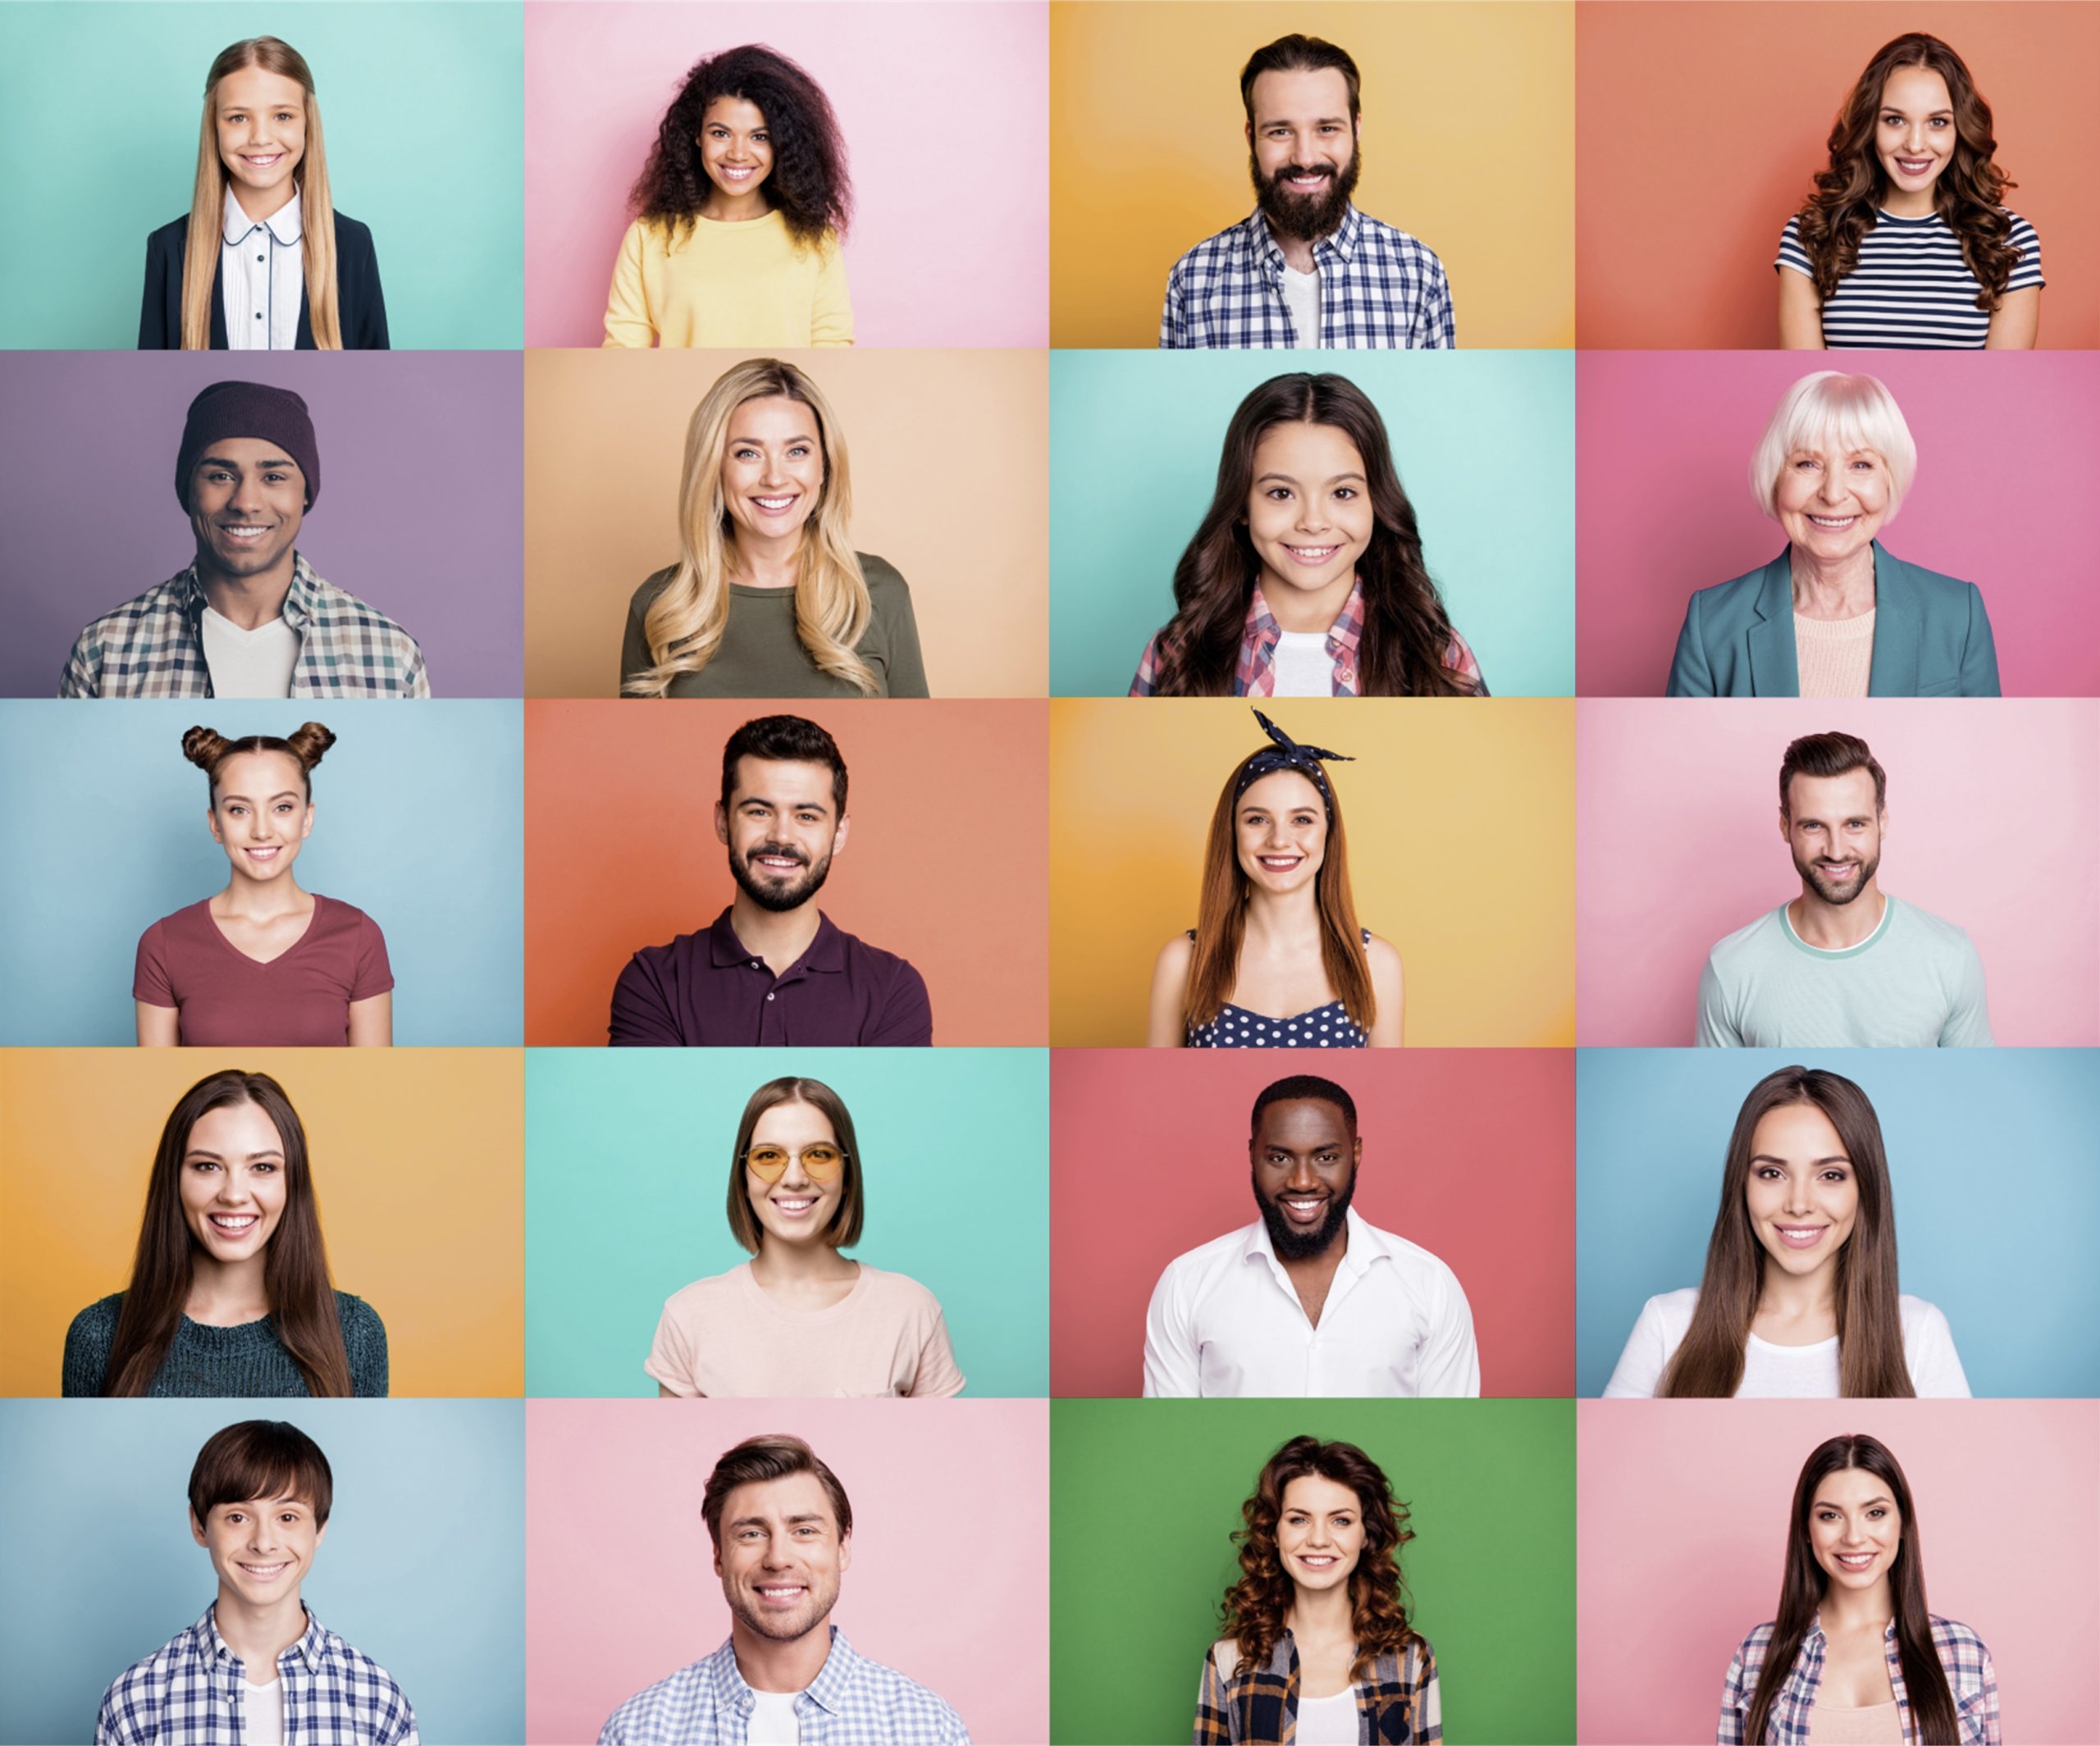 Various people of different ages and races smile in front of multi colored backgrounds